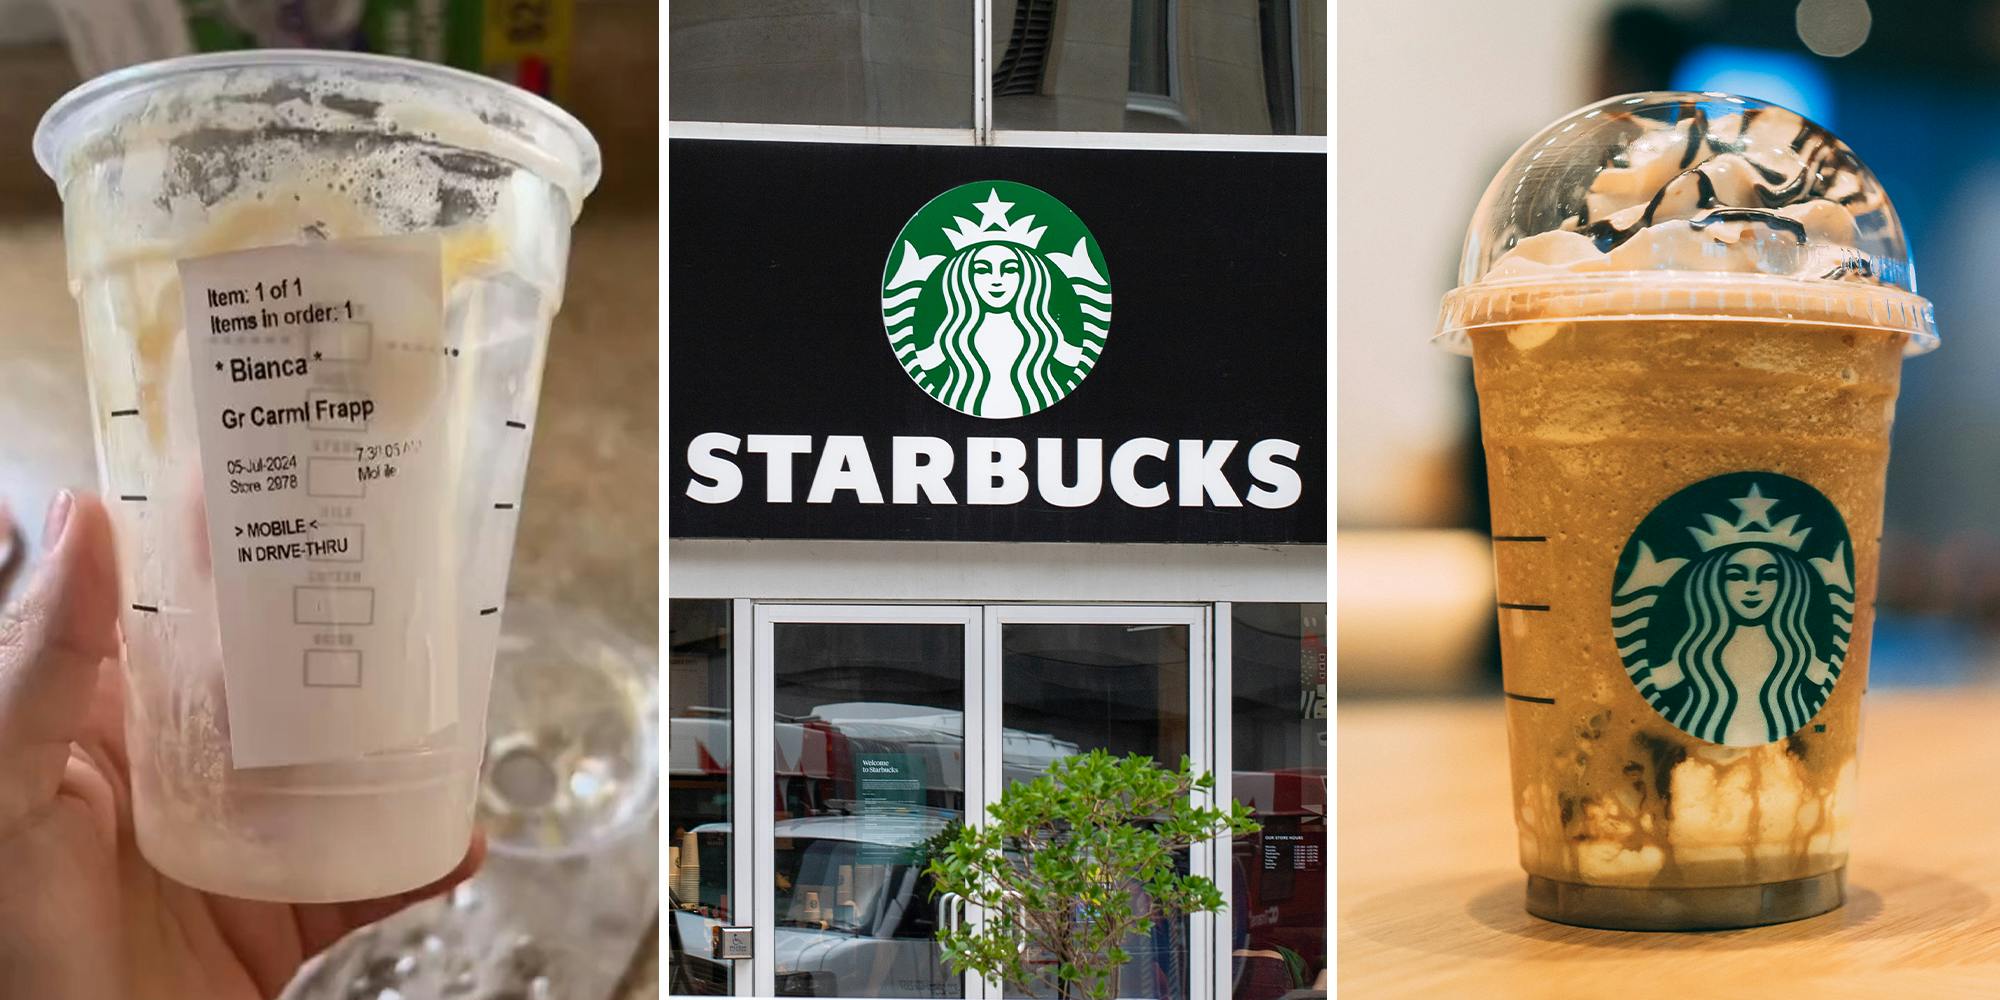 ‘I would sueee’: Customer orders caramel frappuccino from Starbucks, notices something strange inside her drink